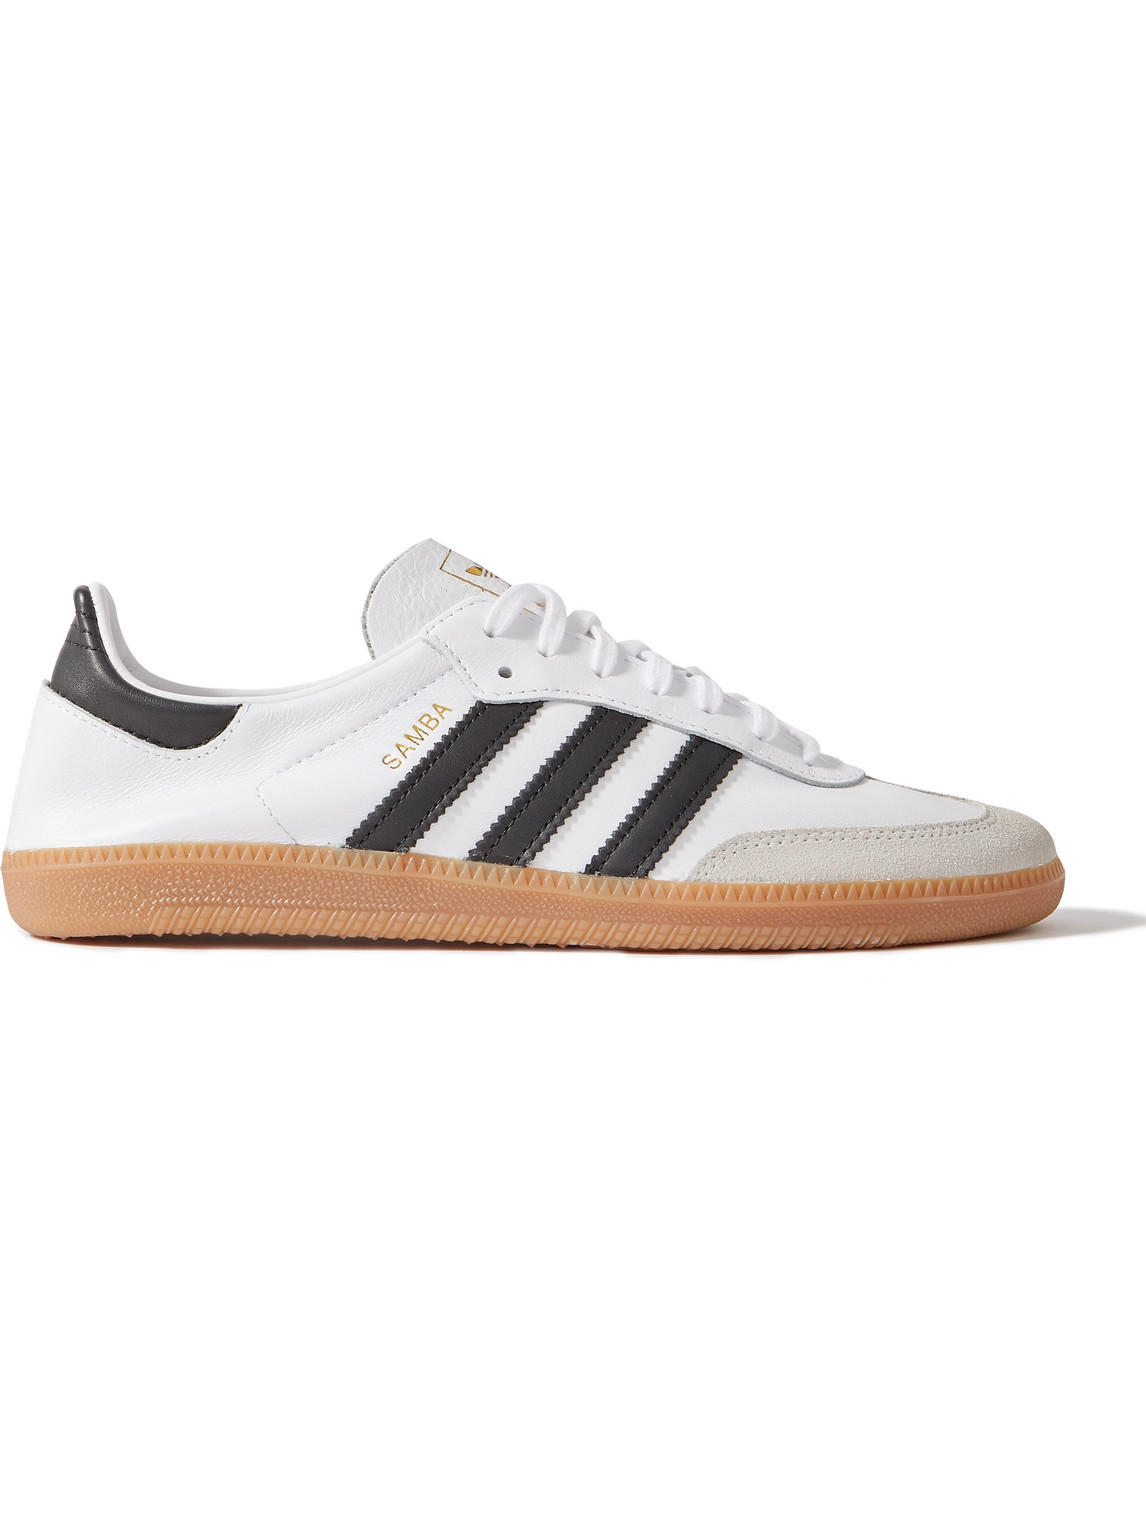 Adidas Originals Samba Decon Suede-trimmed Leather Sneakers In White